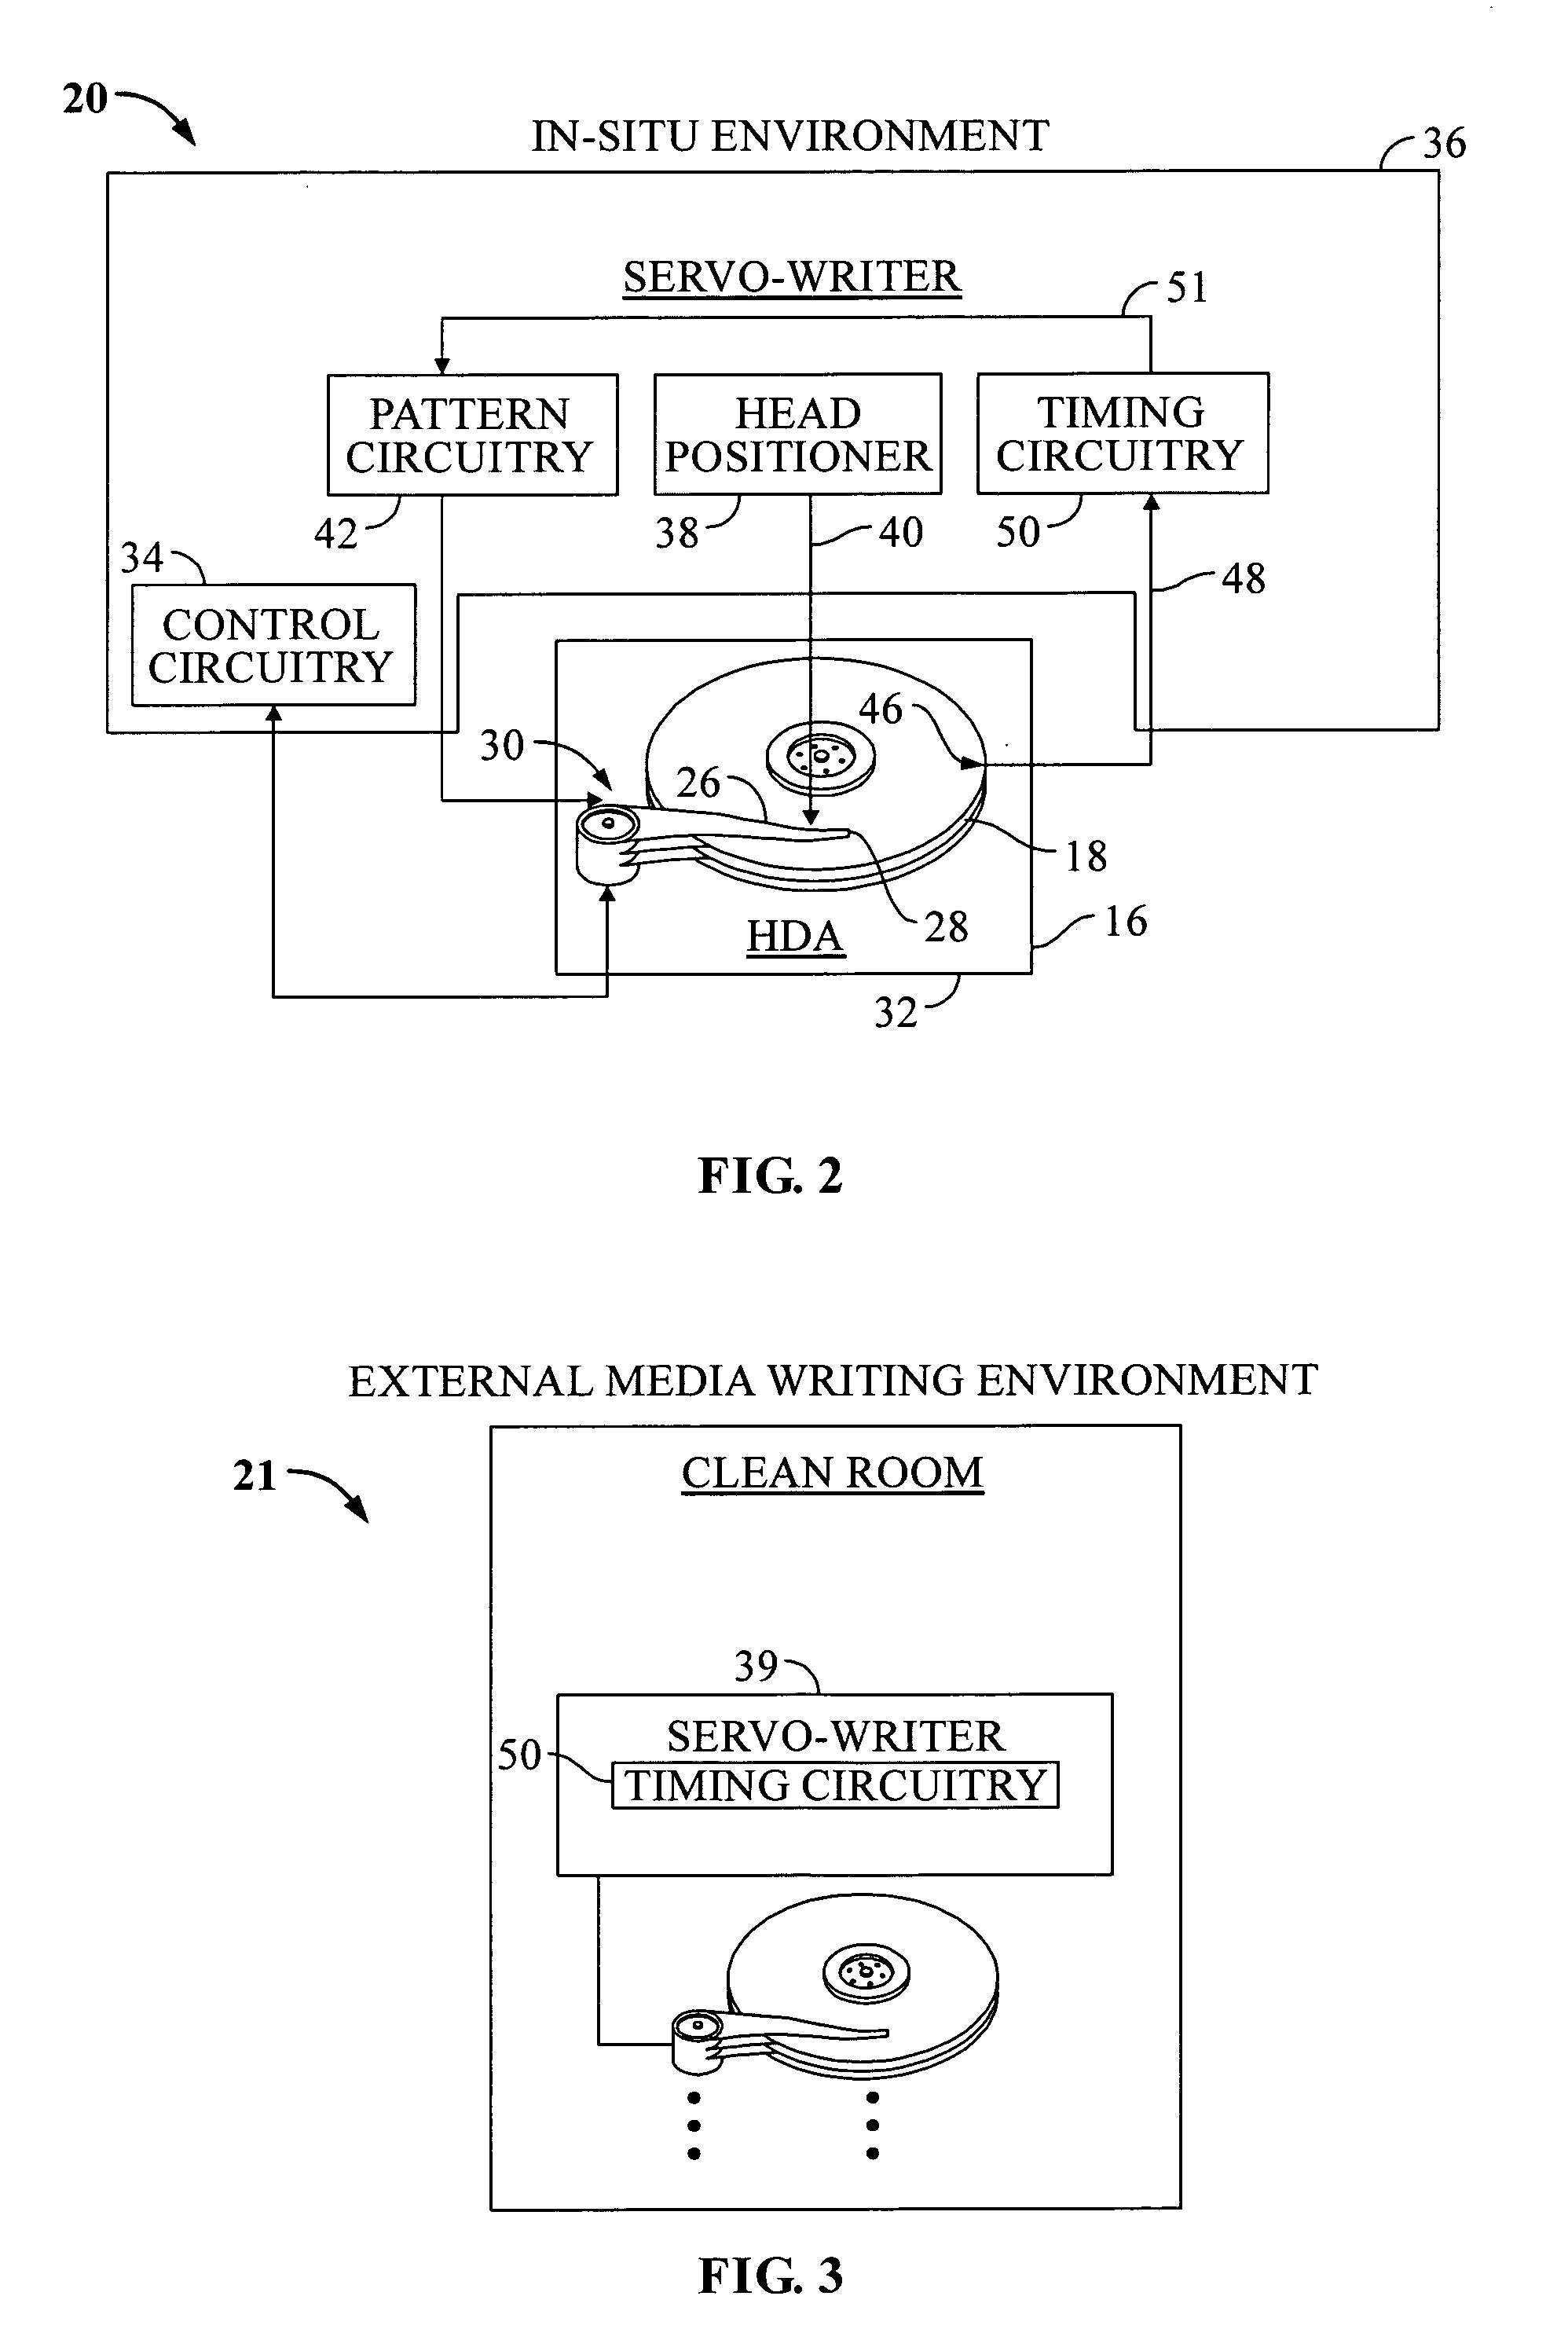 Repeatable timing error correction system for use in a servo writer